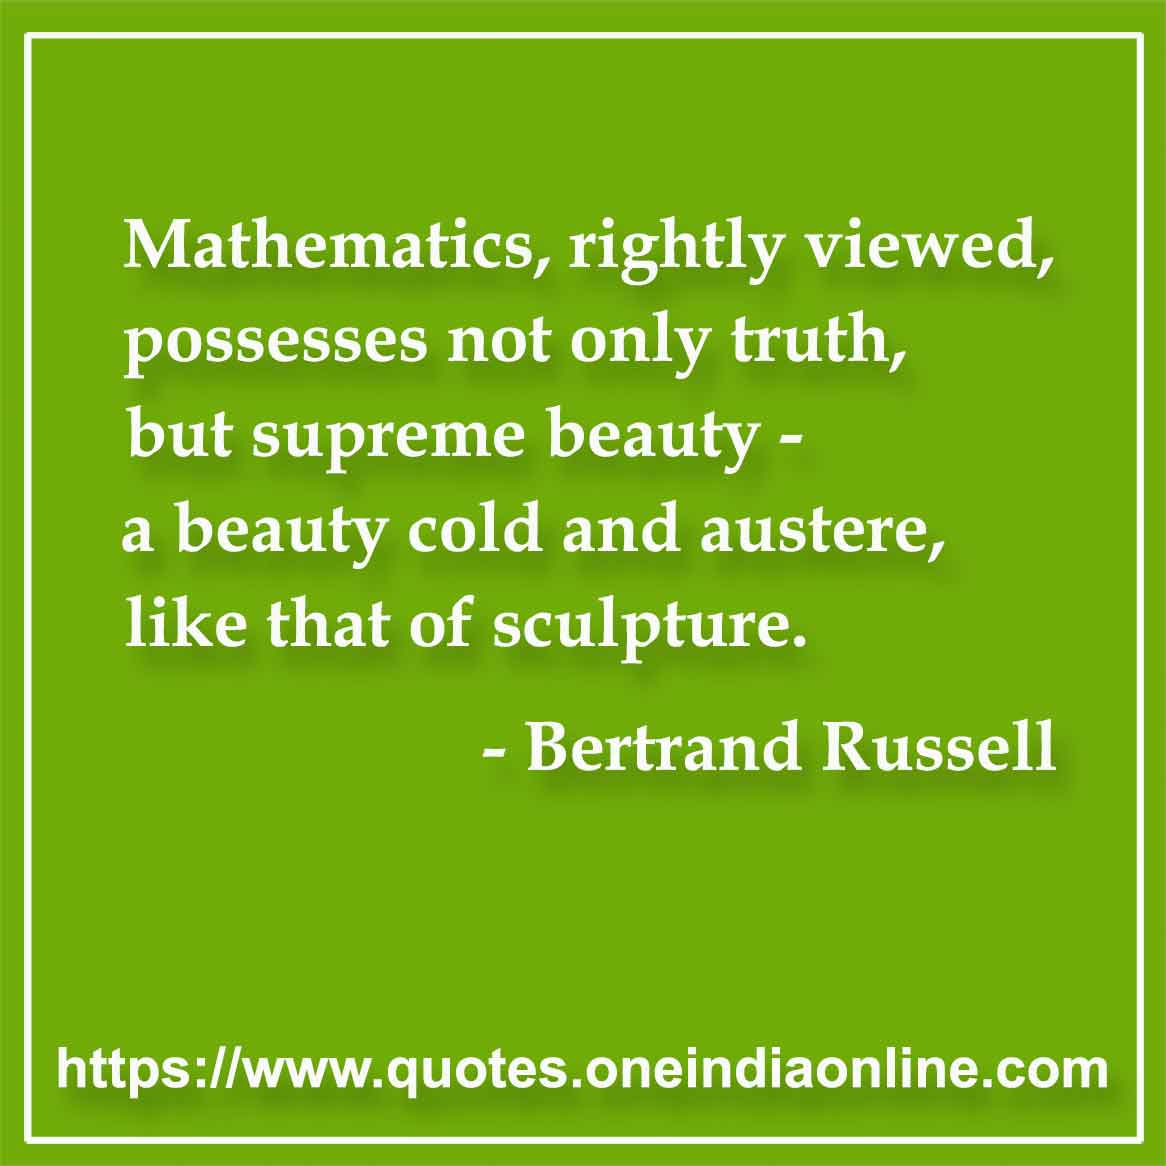 Mathematics, rightly viewed, possesses not only truth, but supreme beauty - a beauty cold and austere, like that of sculpture.

- Mathematics Quotes by Bertrand Russell